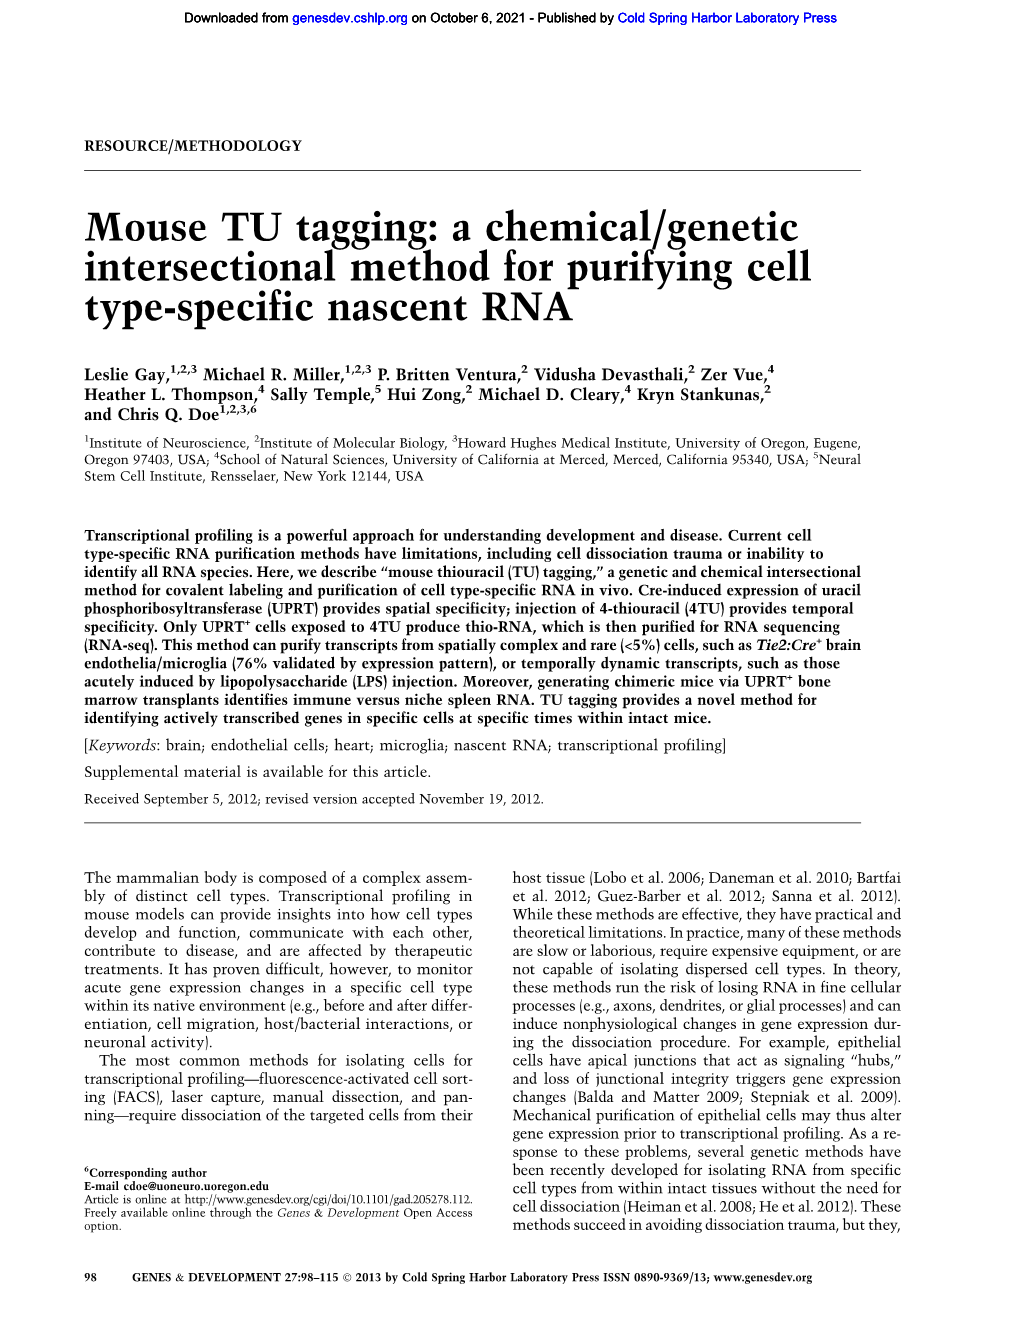 Mouse TU Tagging: a Chemical/Genetic Intersectional Method for Purifying Cell Type-Specific Nascent RNA